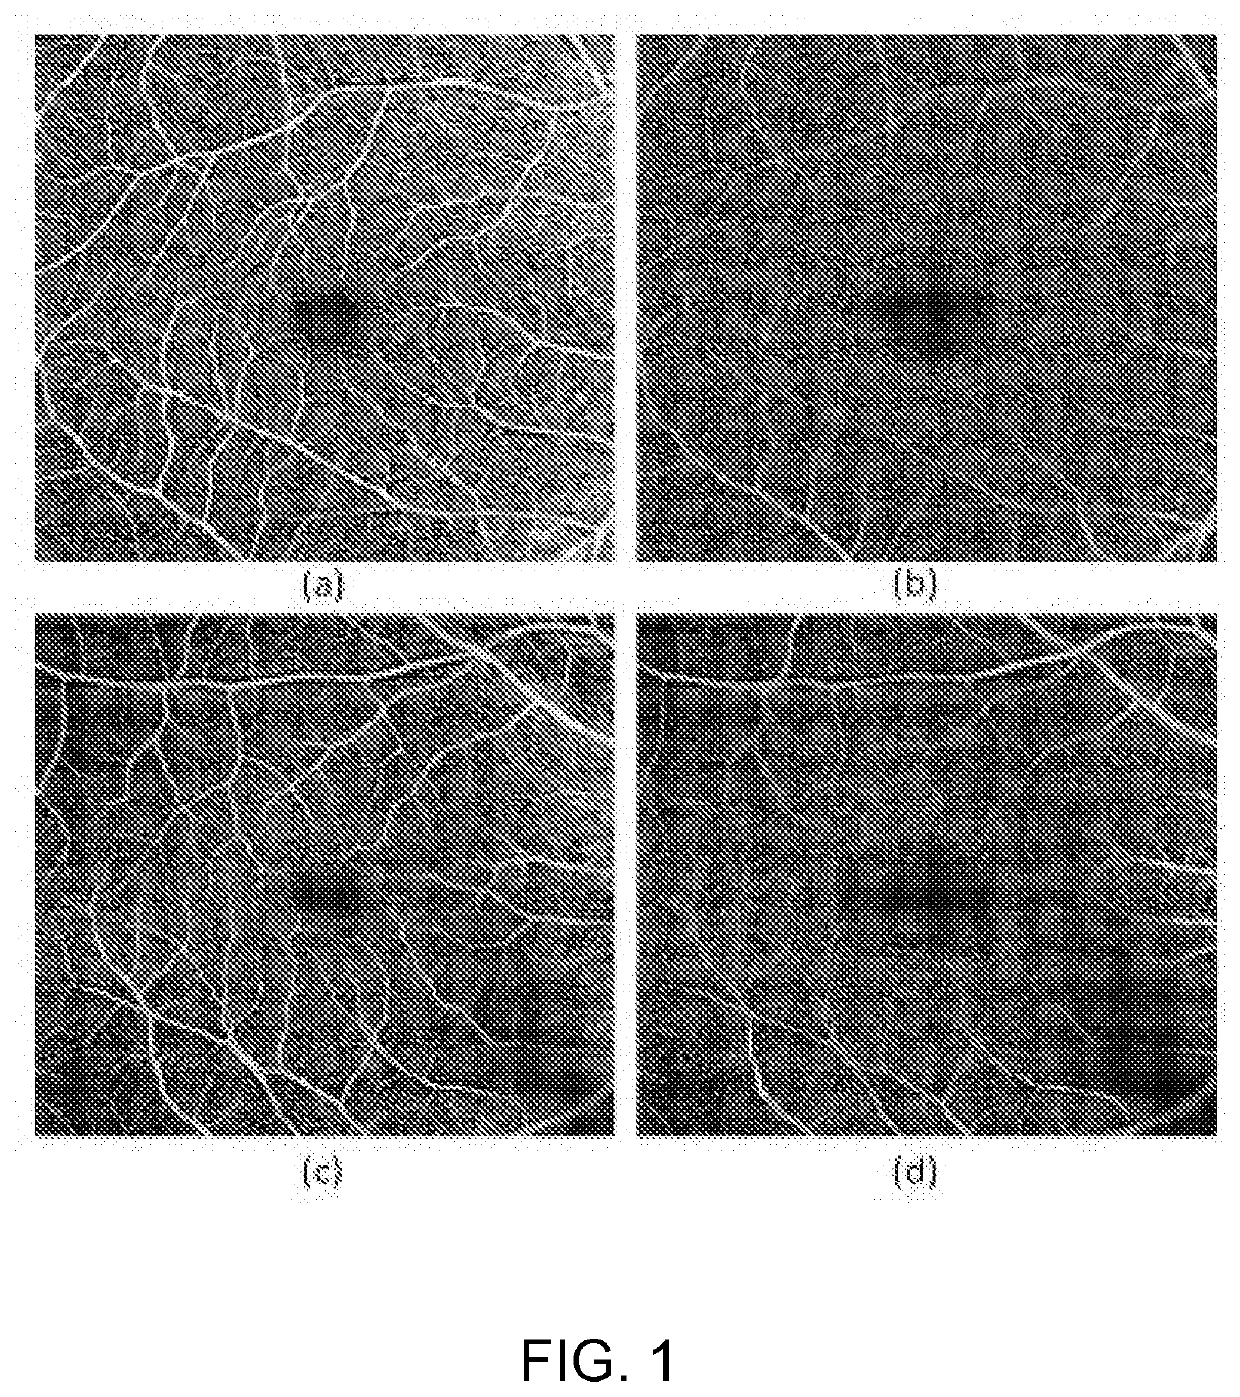 Segmentation of retinal blood vessels in optical coherence tomography angiography images